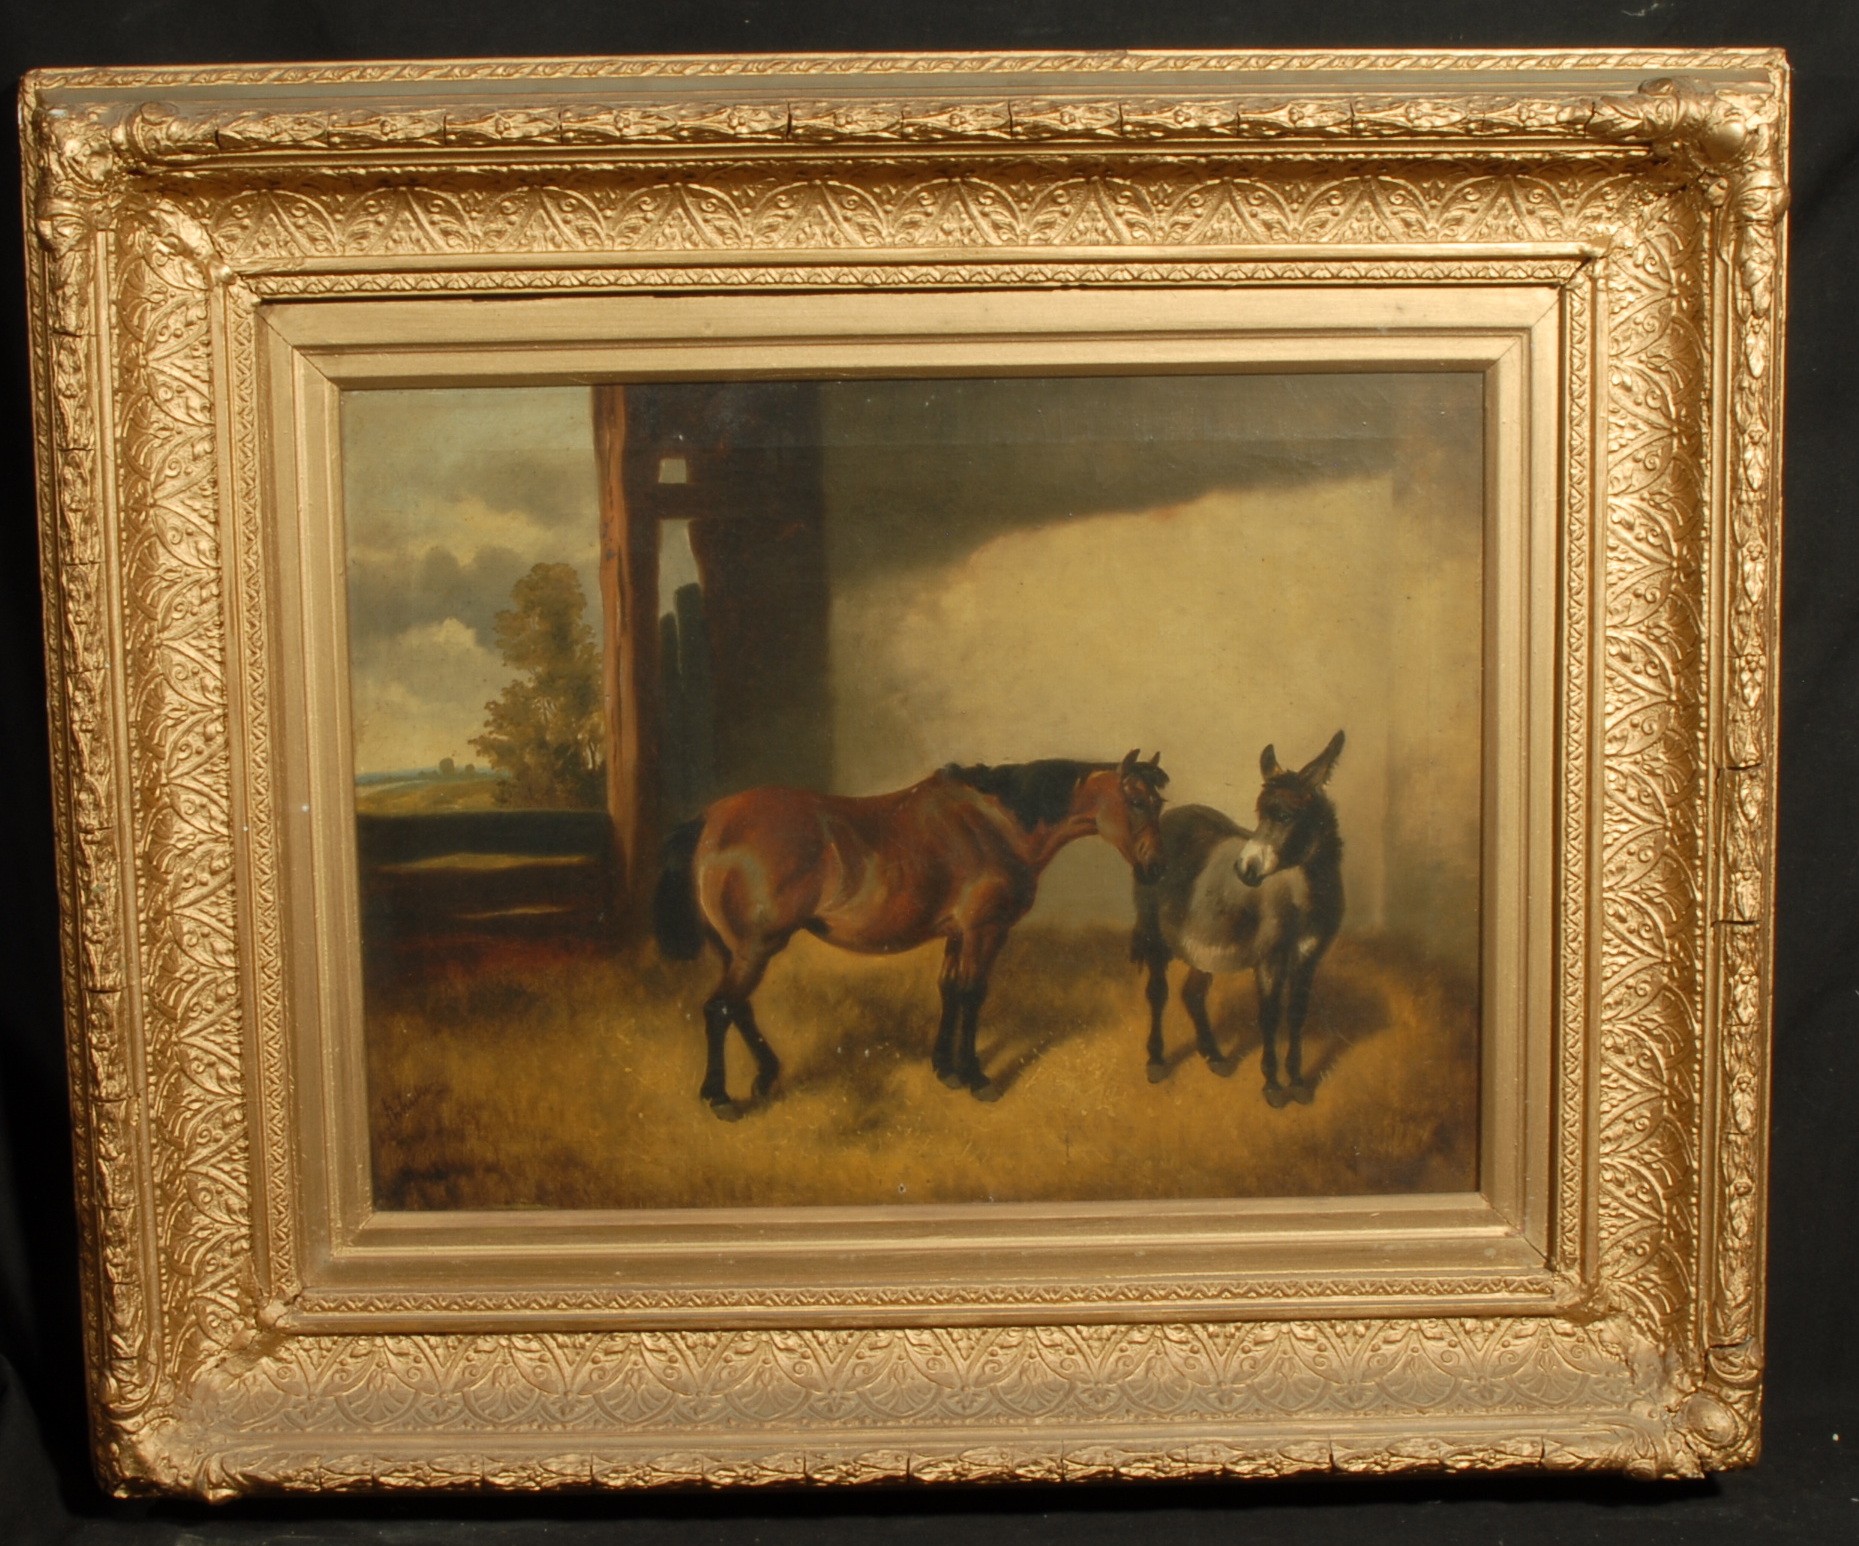 John Alfred Wheeler (1821 - 1903) Stable Mates, Horse and Donkey signed, oil on canvas, 36.5cm x - Image 2 of 4